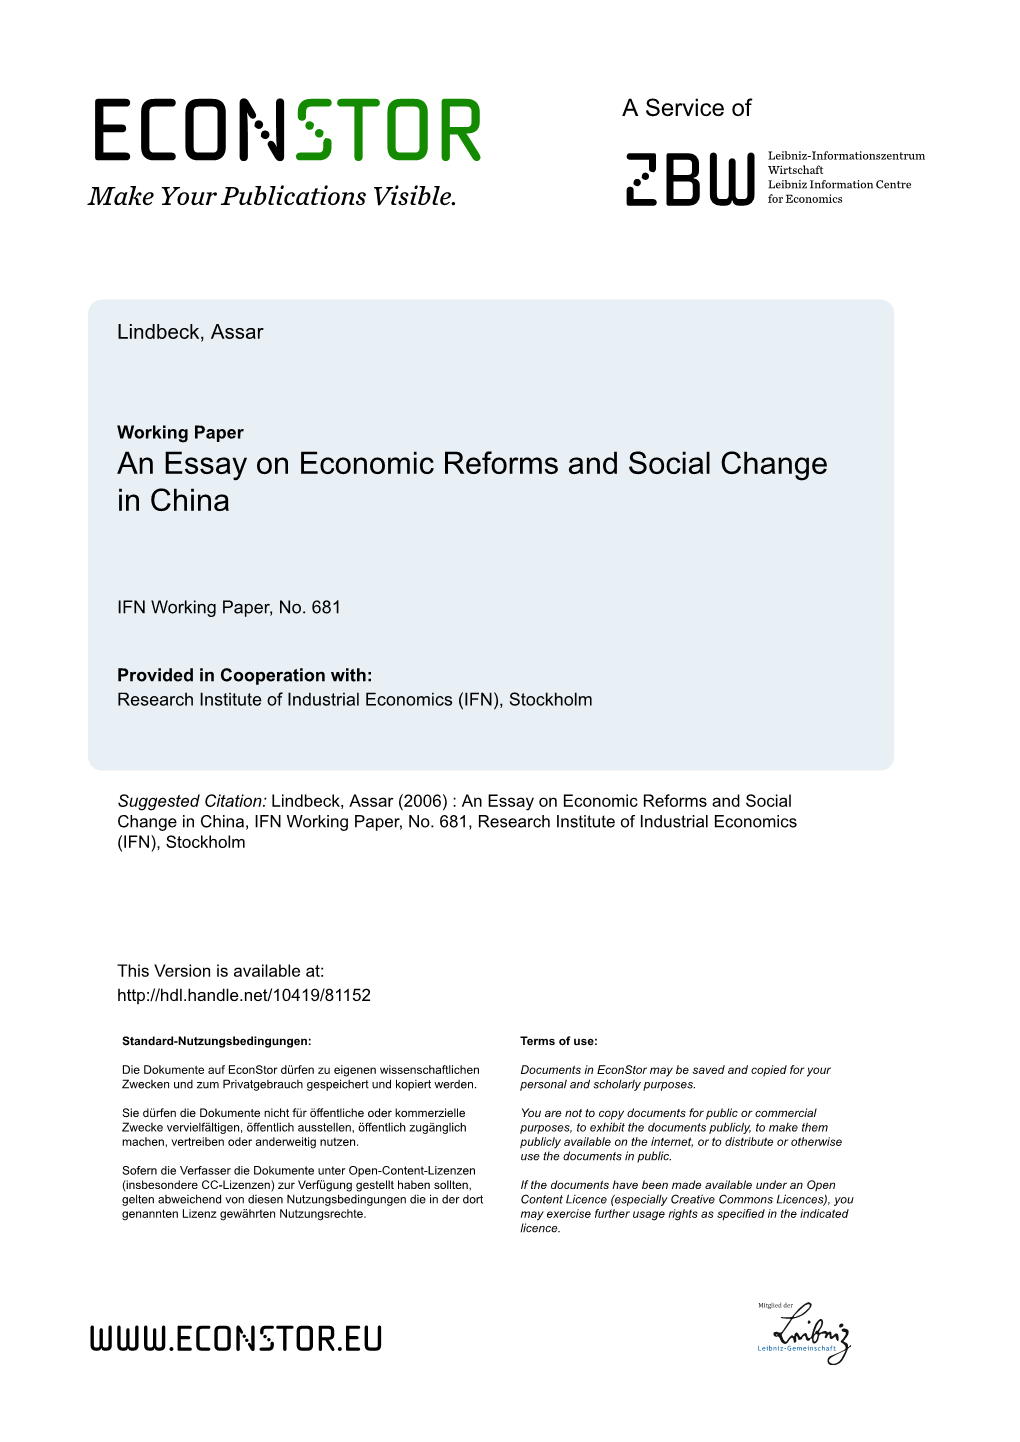 An Essay on Economic Reforms and Social Change in China